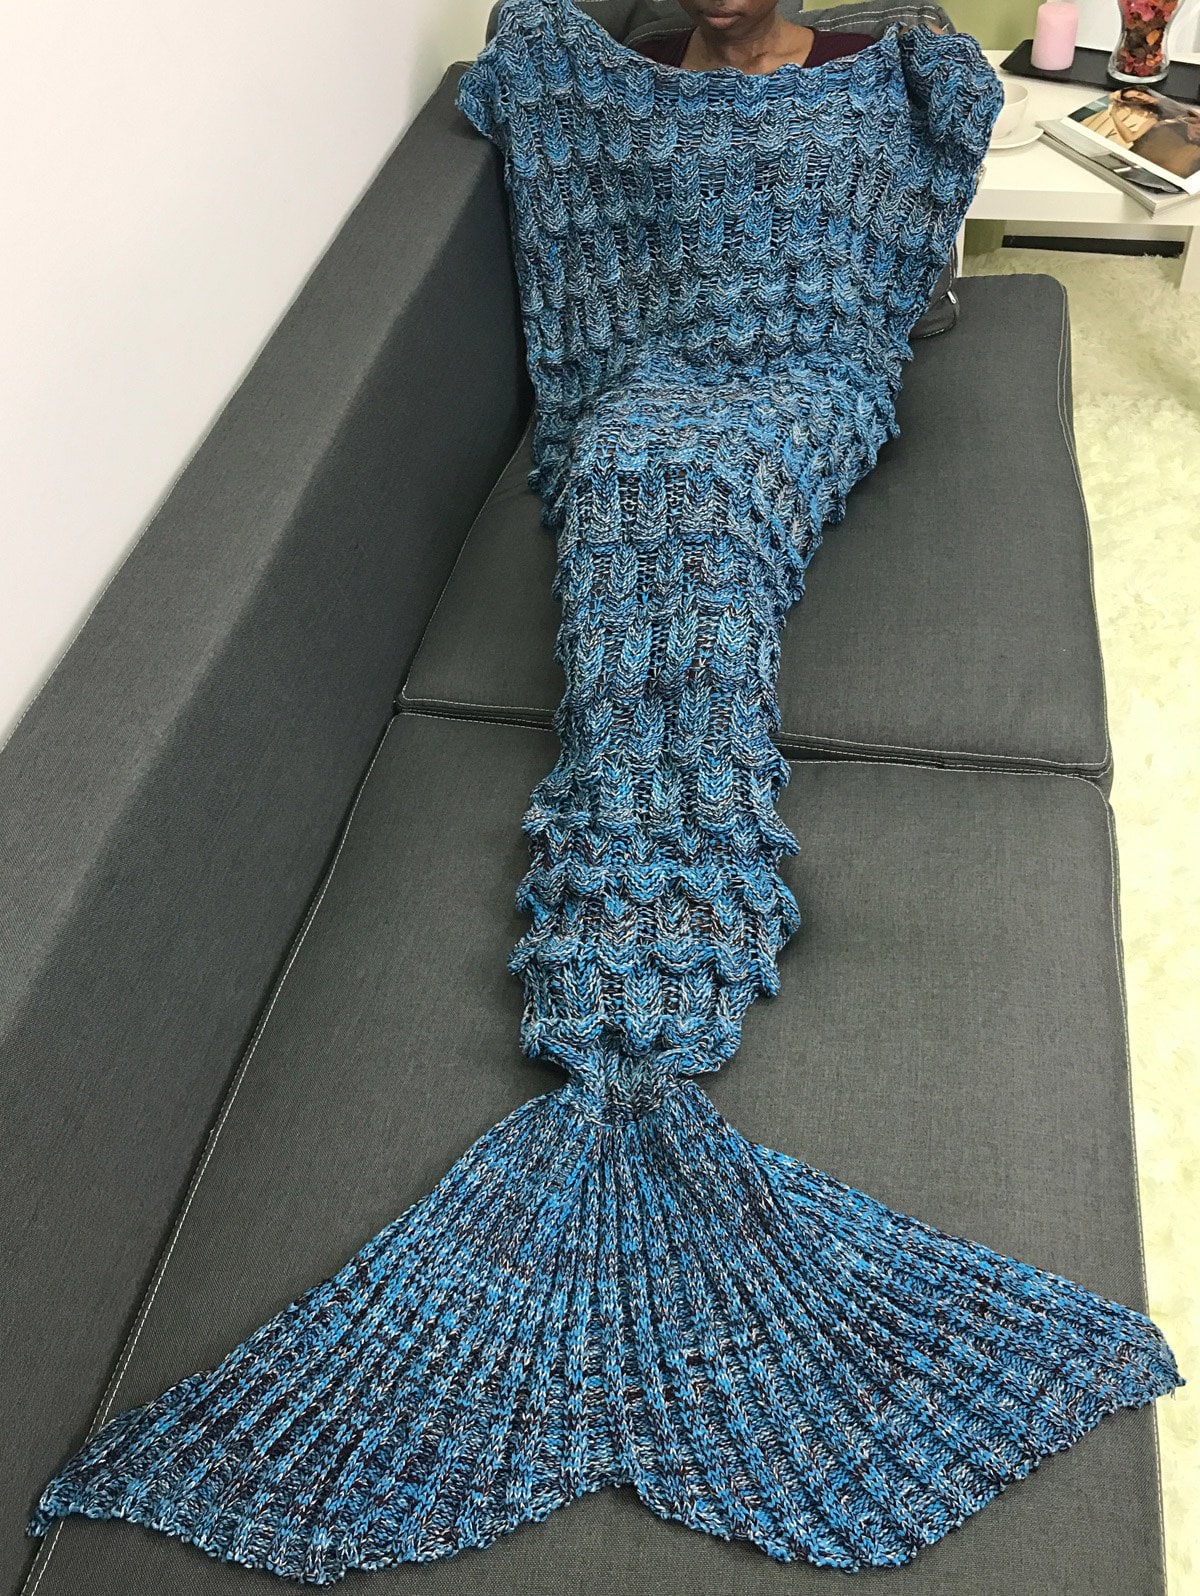 Knitting Fish Scales Design Mermaid Tail Style Blanket